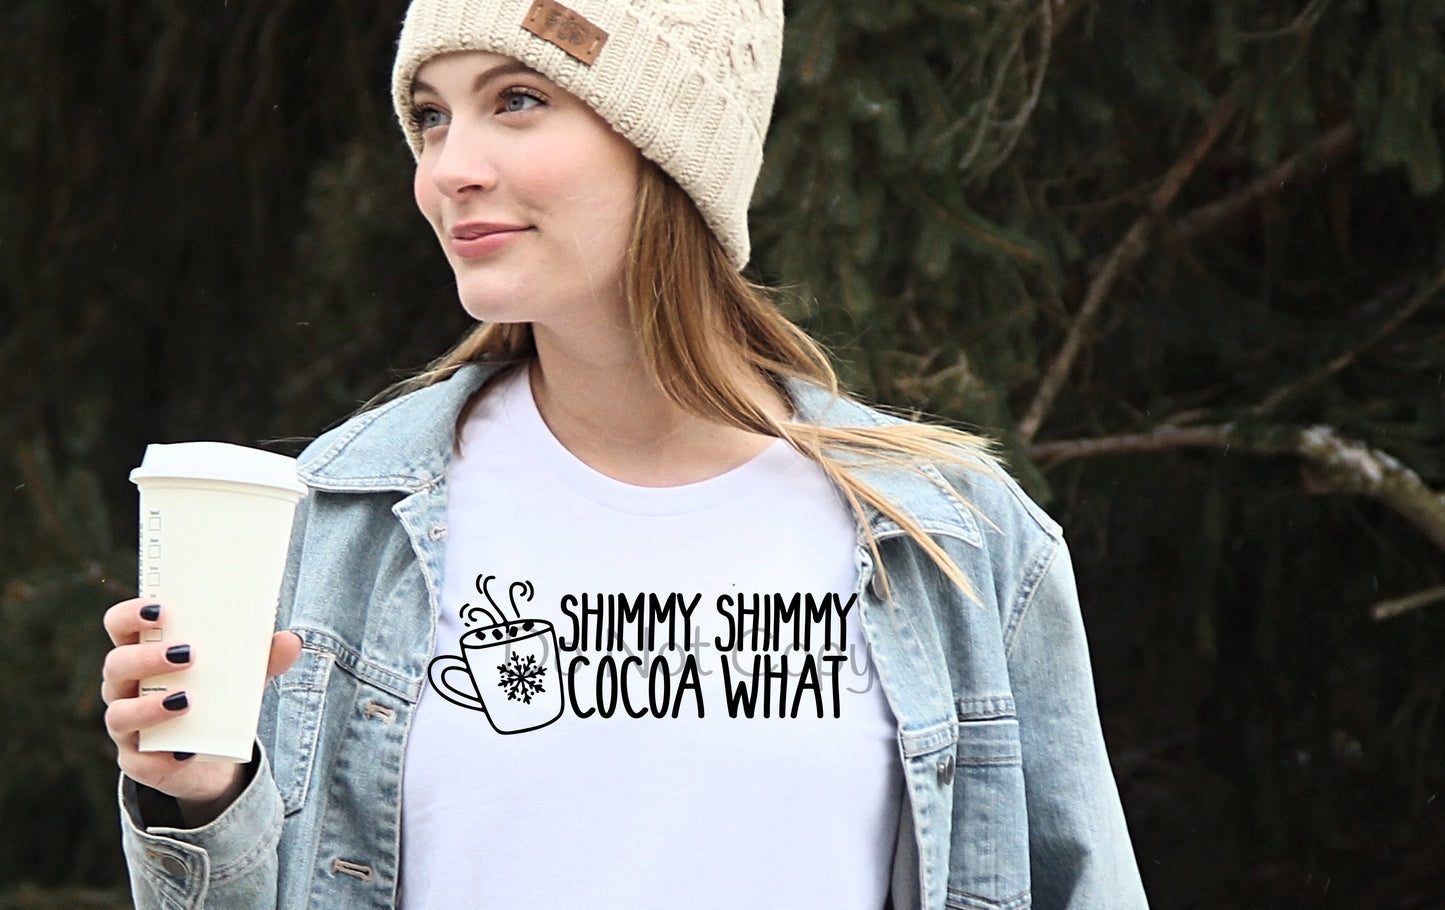 Shimmy shimmy cocoa what-DTF